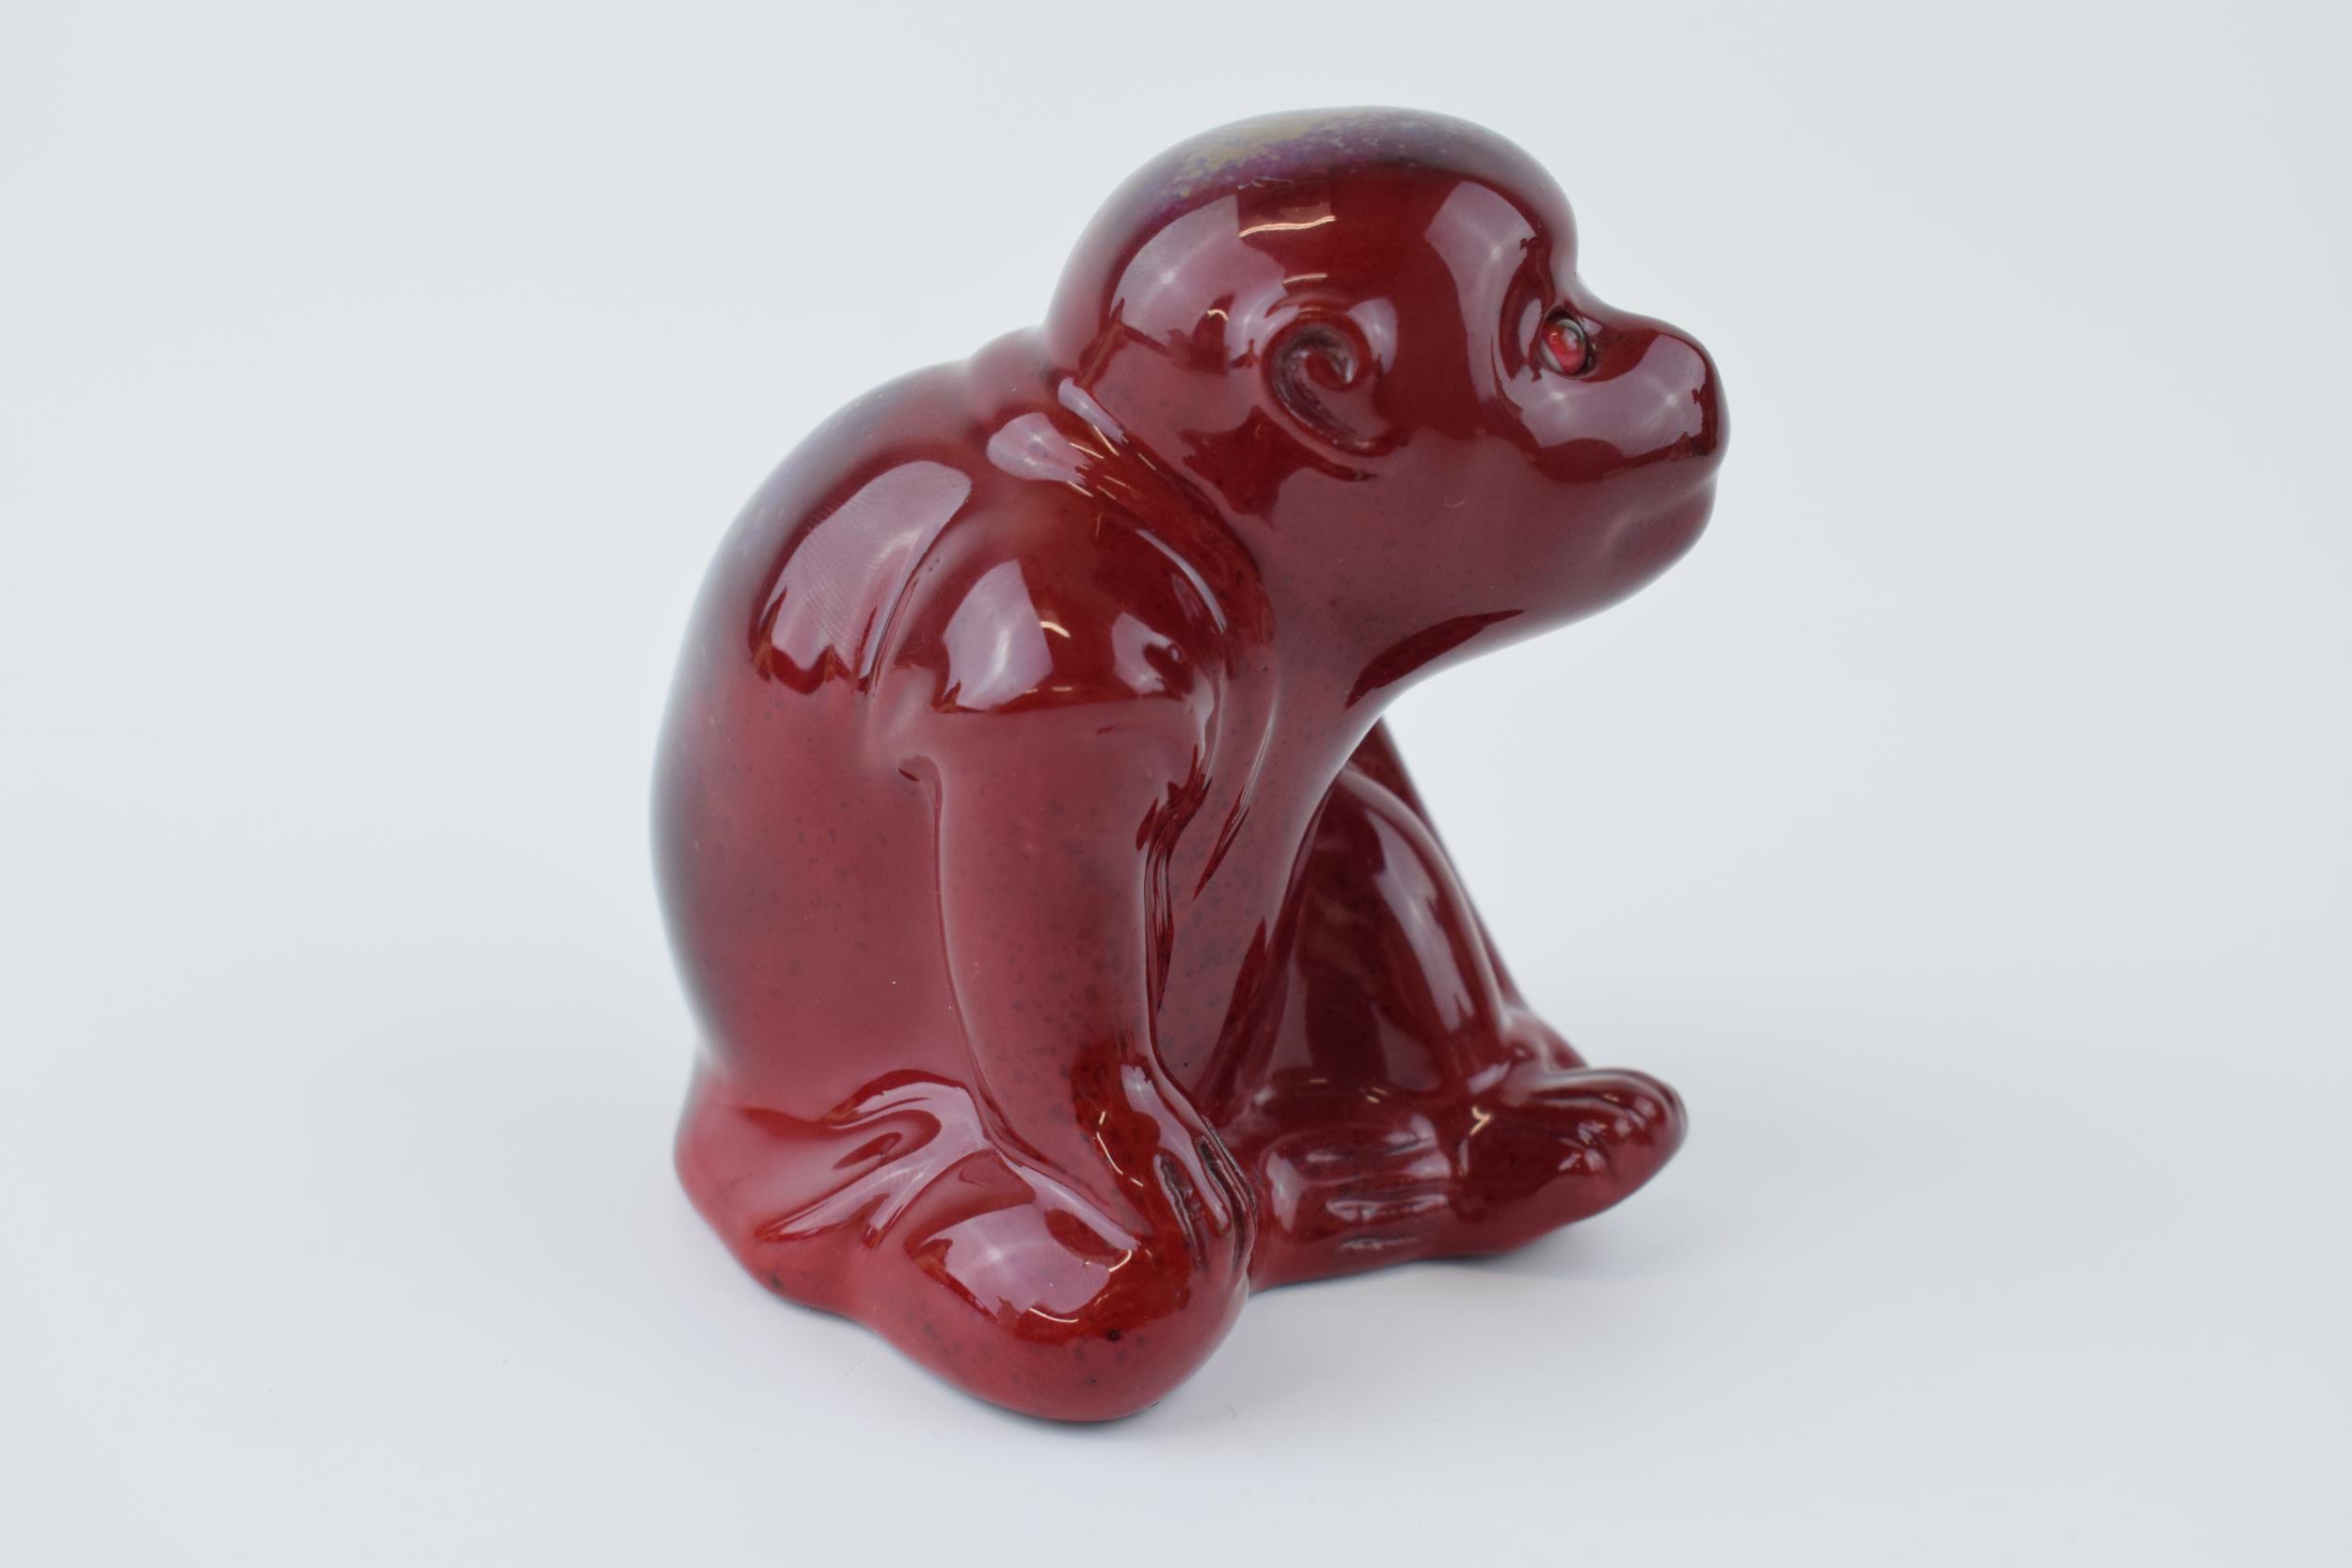 Bernard Moore 'Monkey' Flambe porcelain with glass eyes. Height 8.5cm. Free of damage or - Image 3 of 5